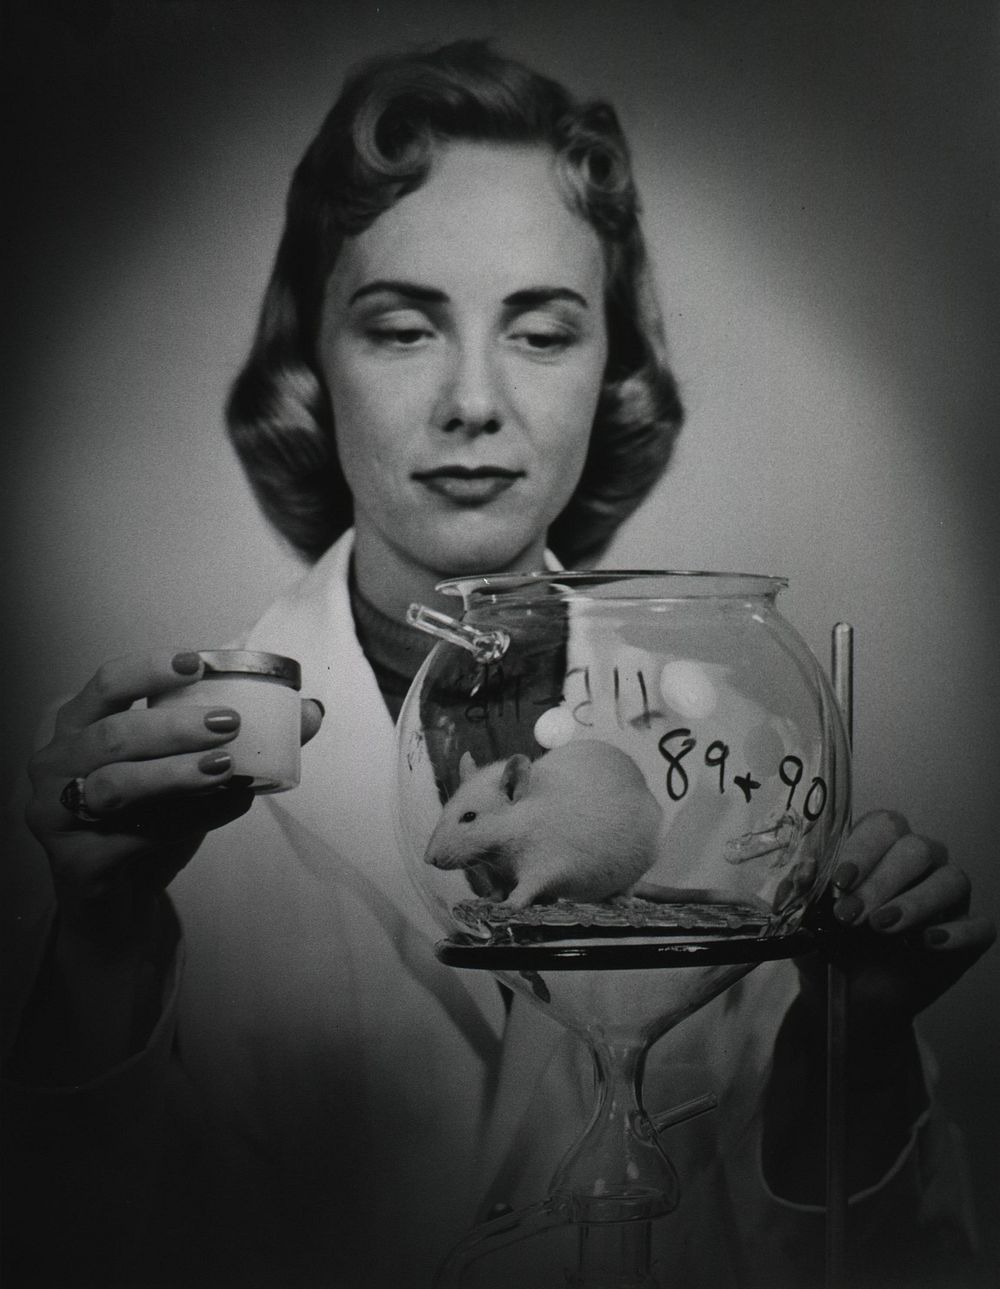 NIH- Unidentified Laboratory Photos. Original public domain image from Flickr